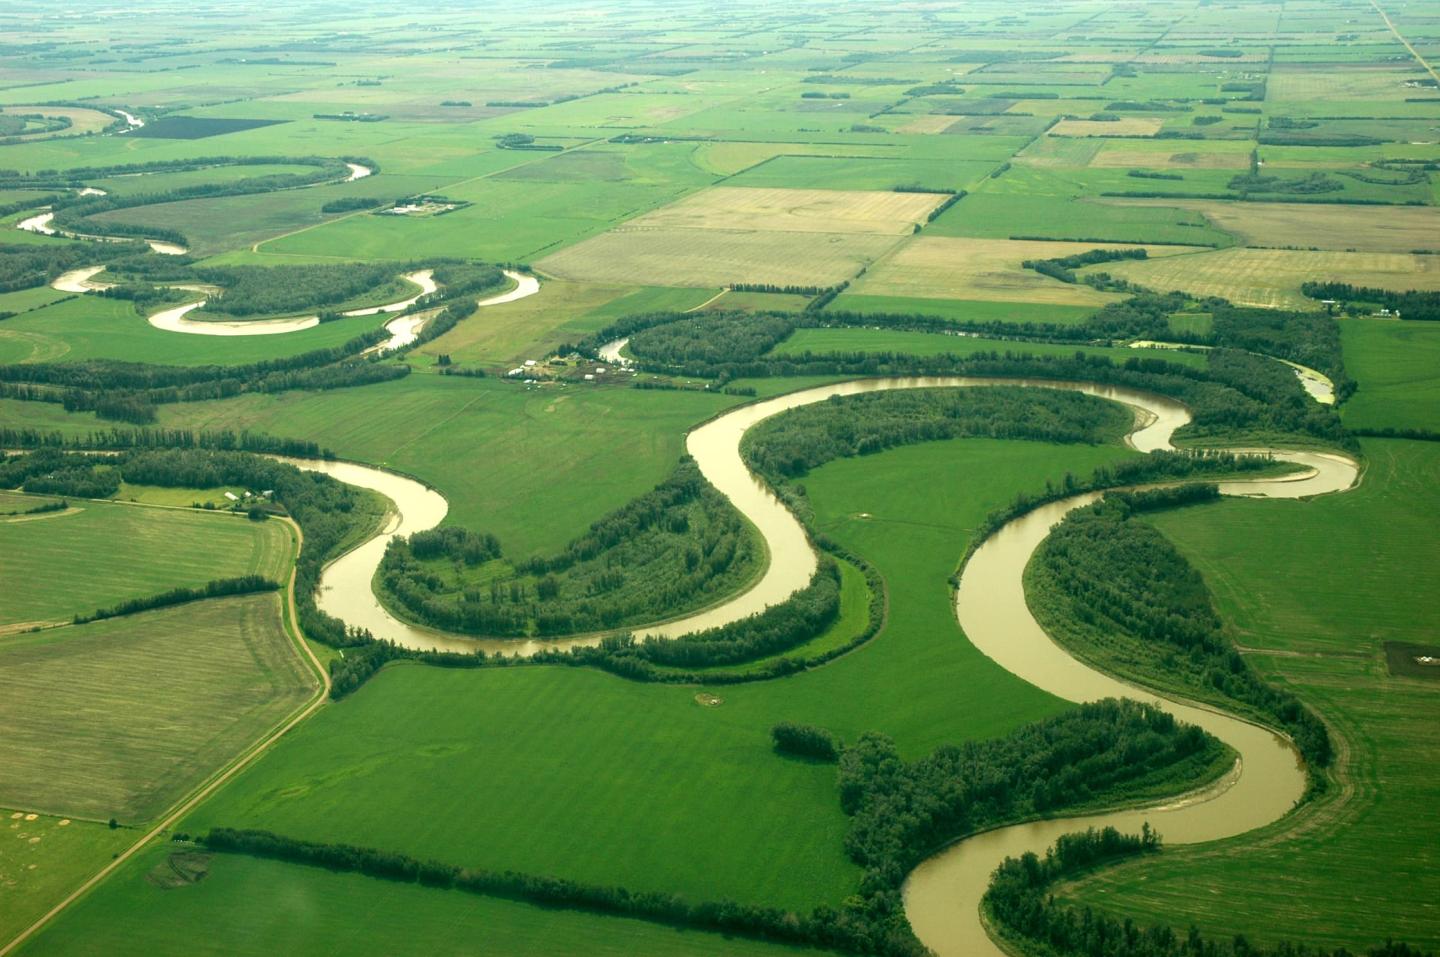 A river with huge curves in it, making an oxbow lake